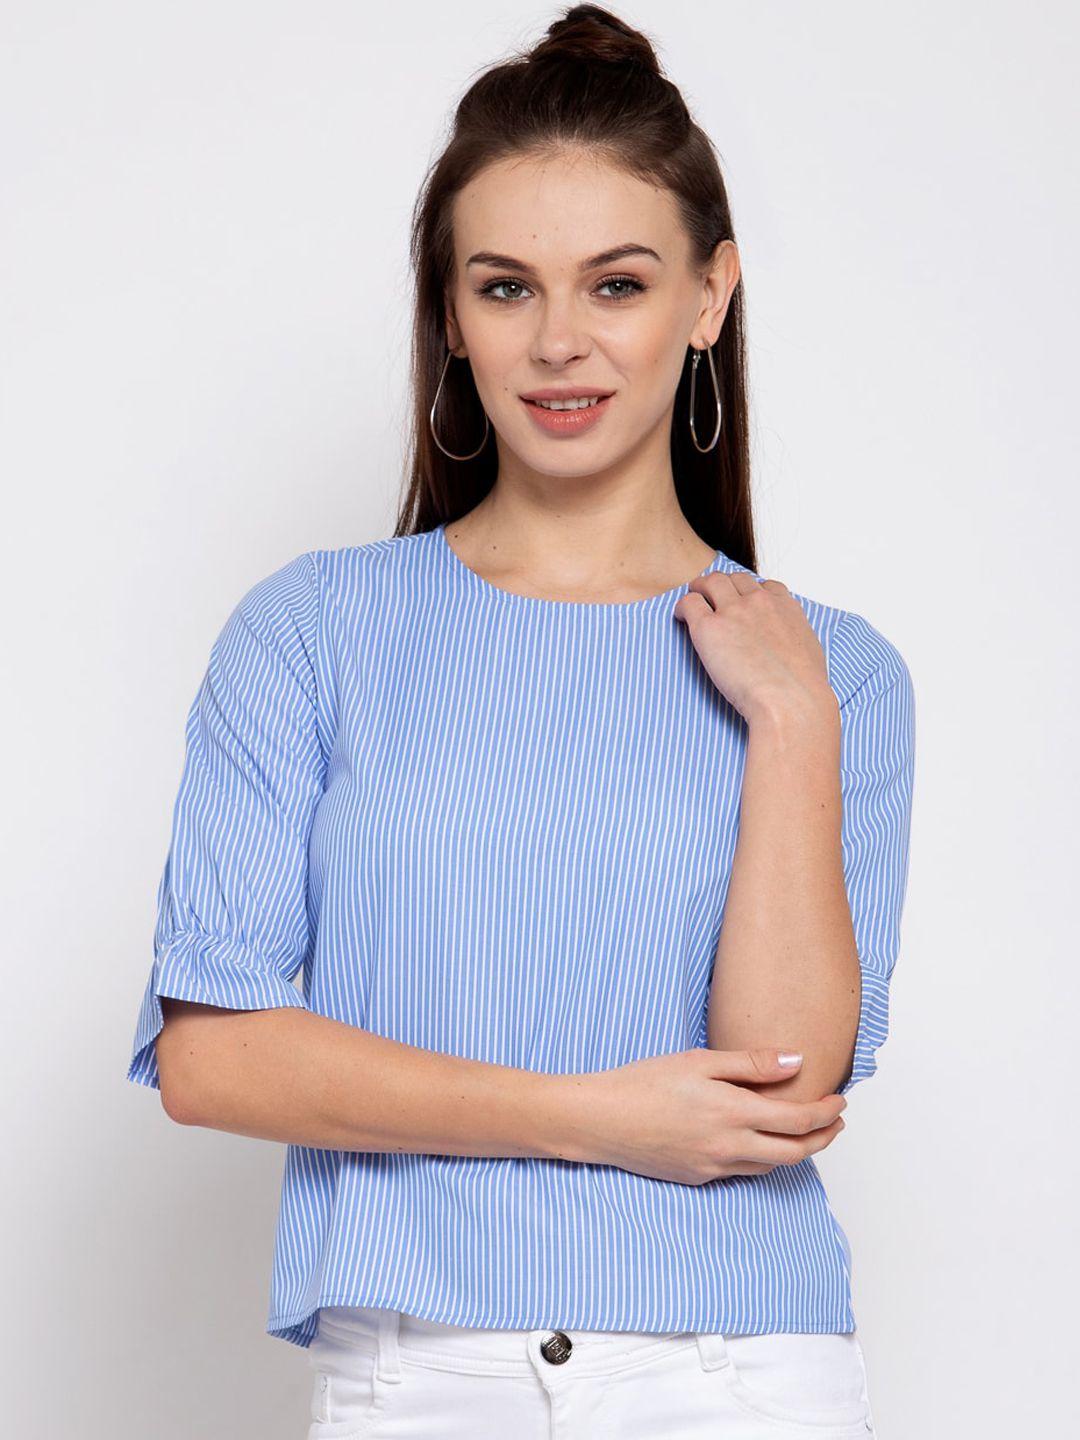 style quotient blue & white striped top